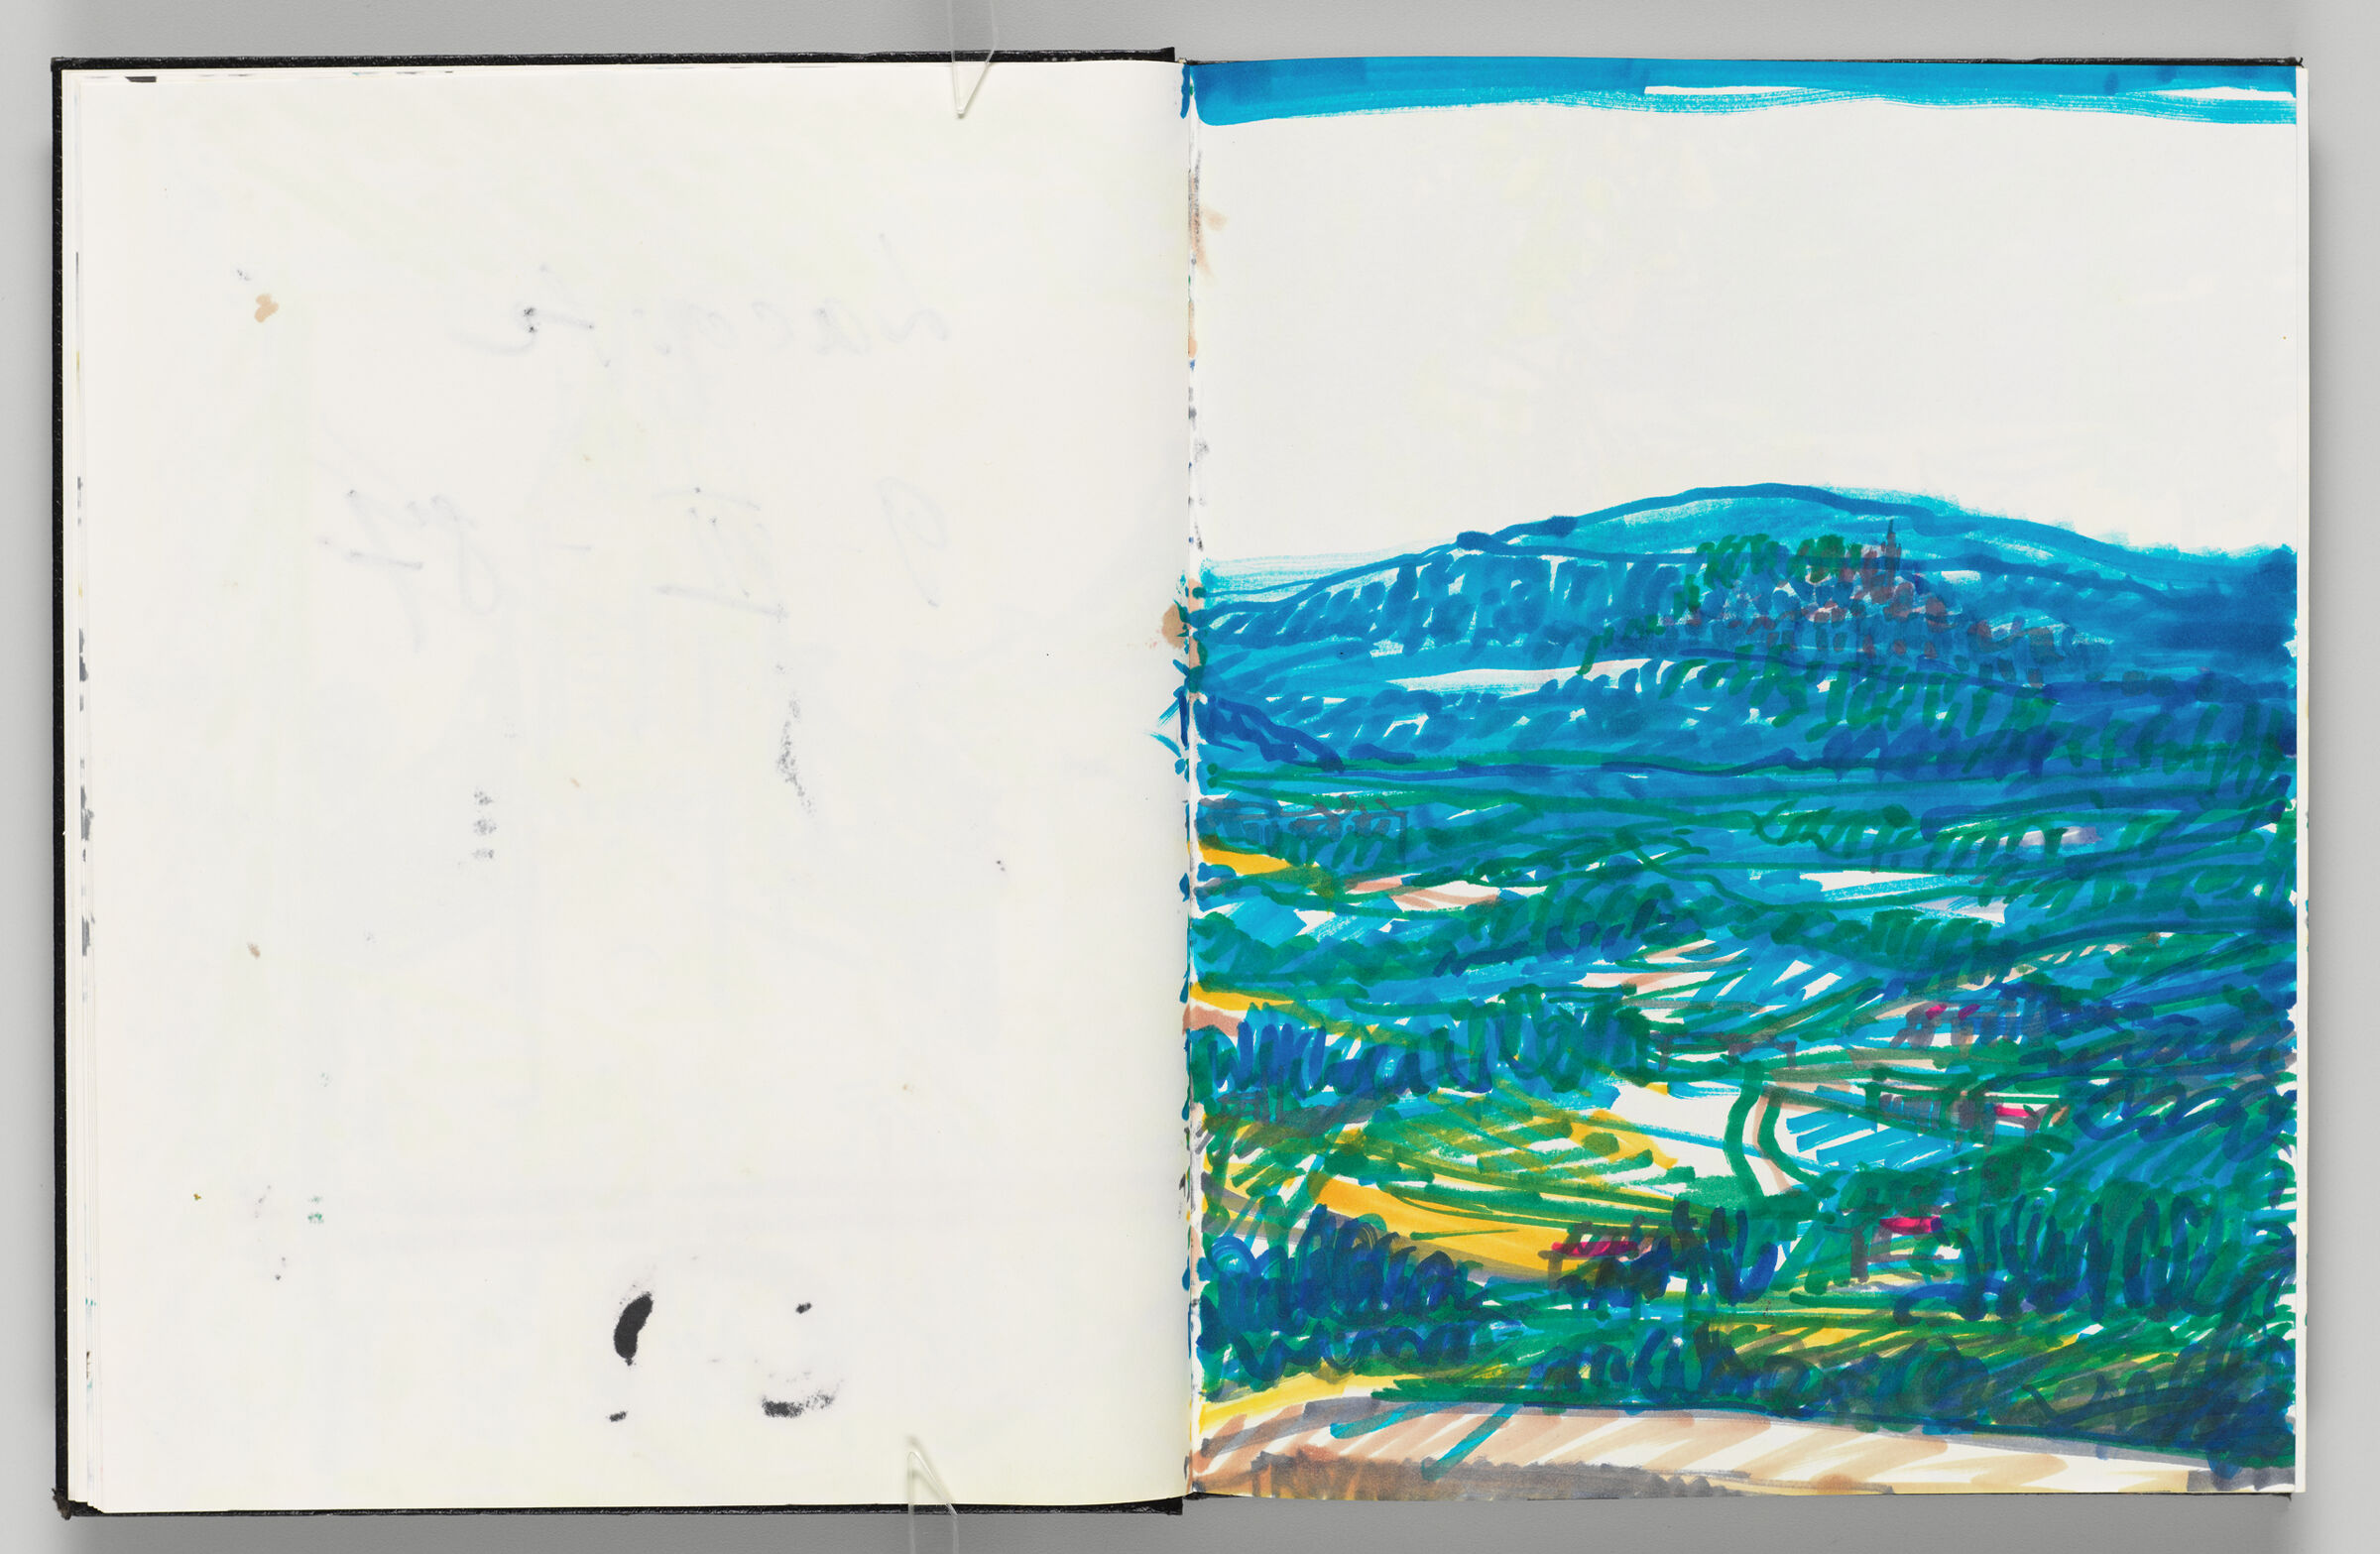 Untitled (Bleed-Through Of Previous Page With Color Transfer, Left Page); Untitled (Lacoste Landscape, Right Page)